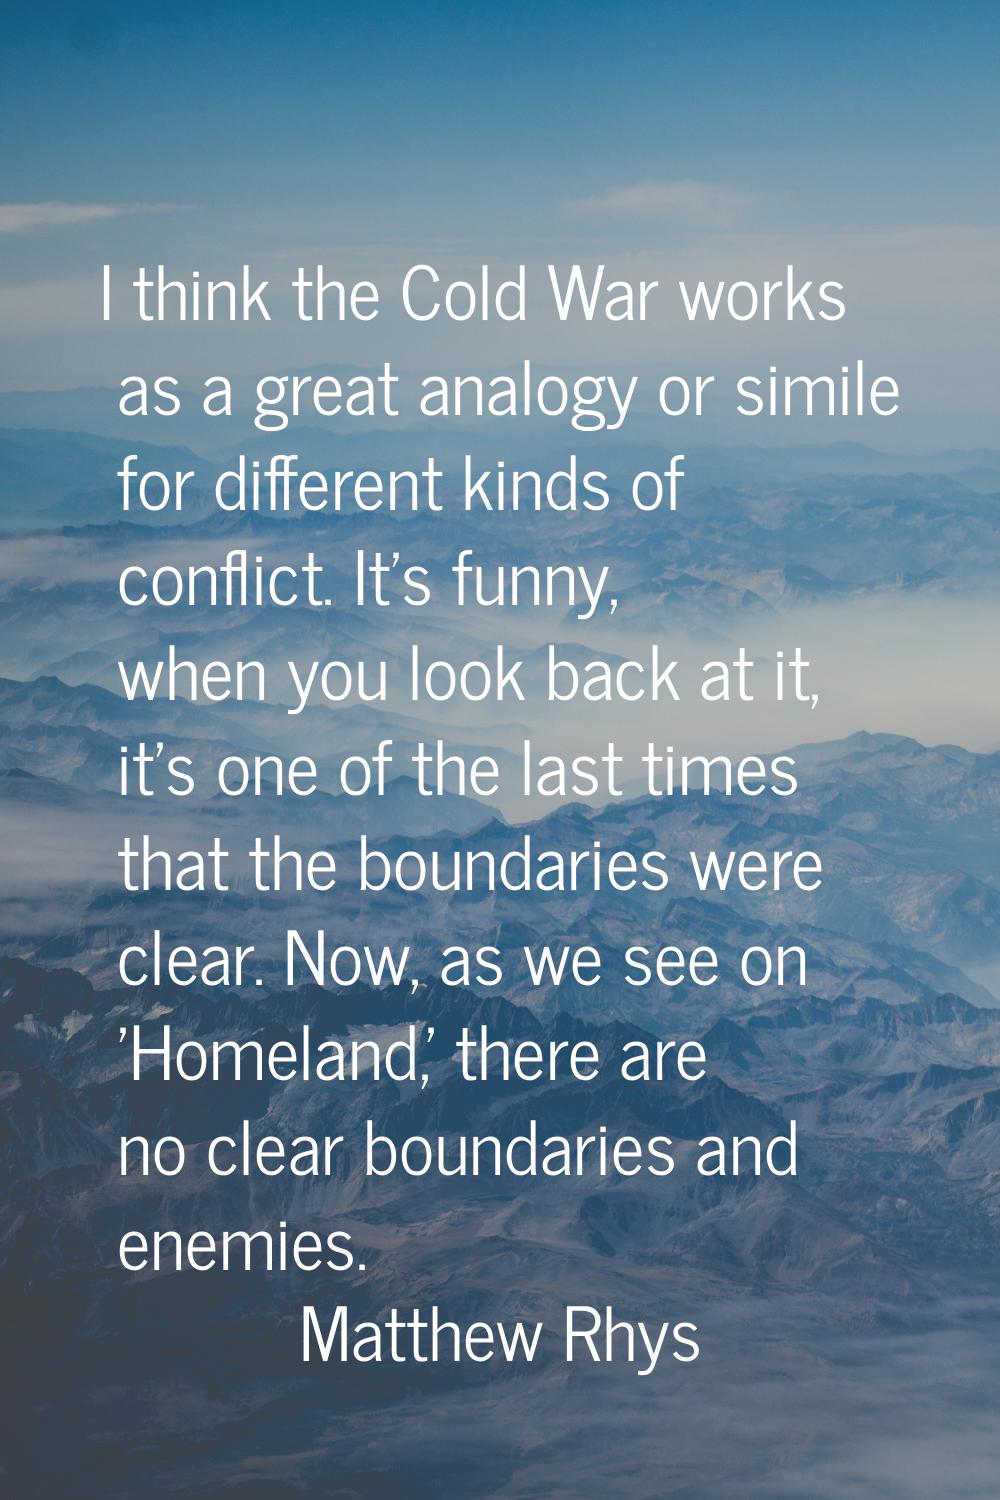 I think the Cold War works as a great analogy or simile for different kinds of conflict. It's funny